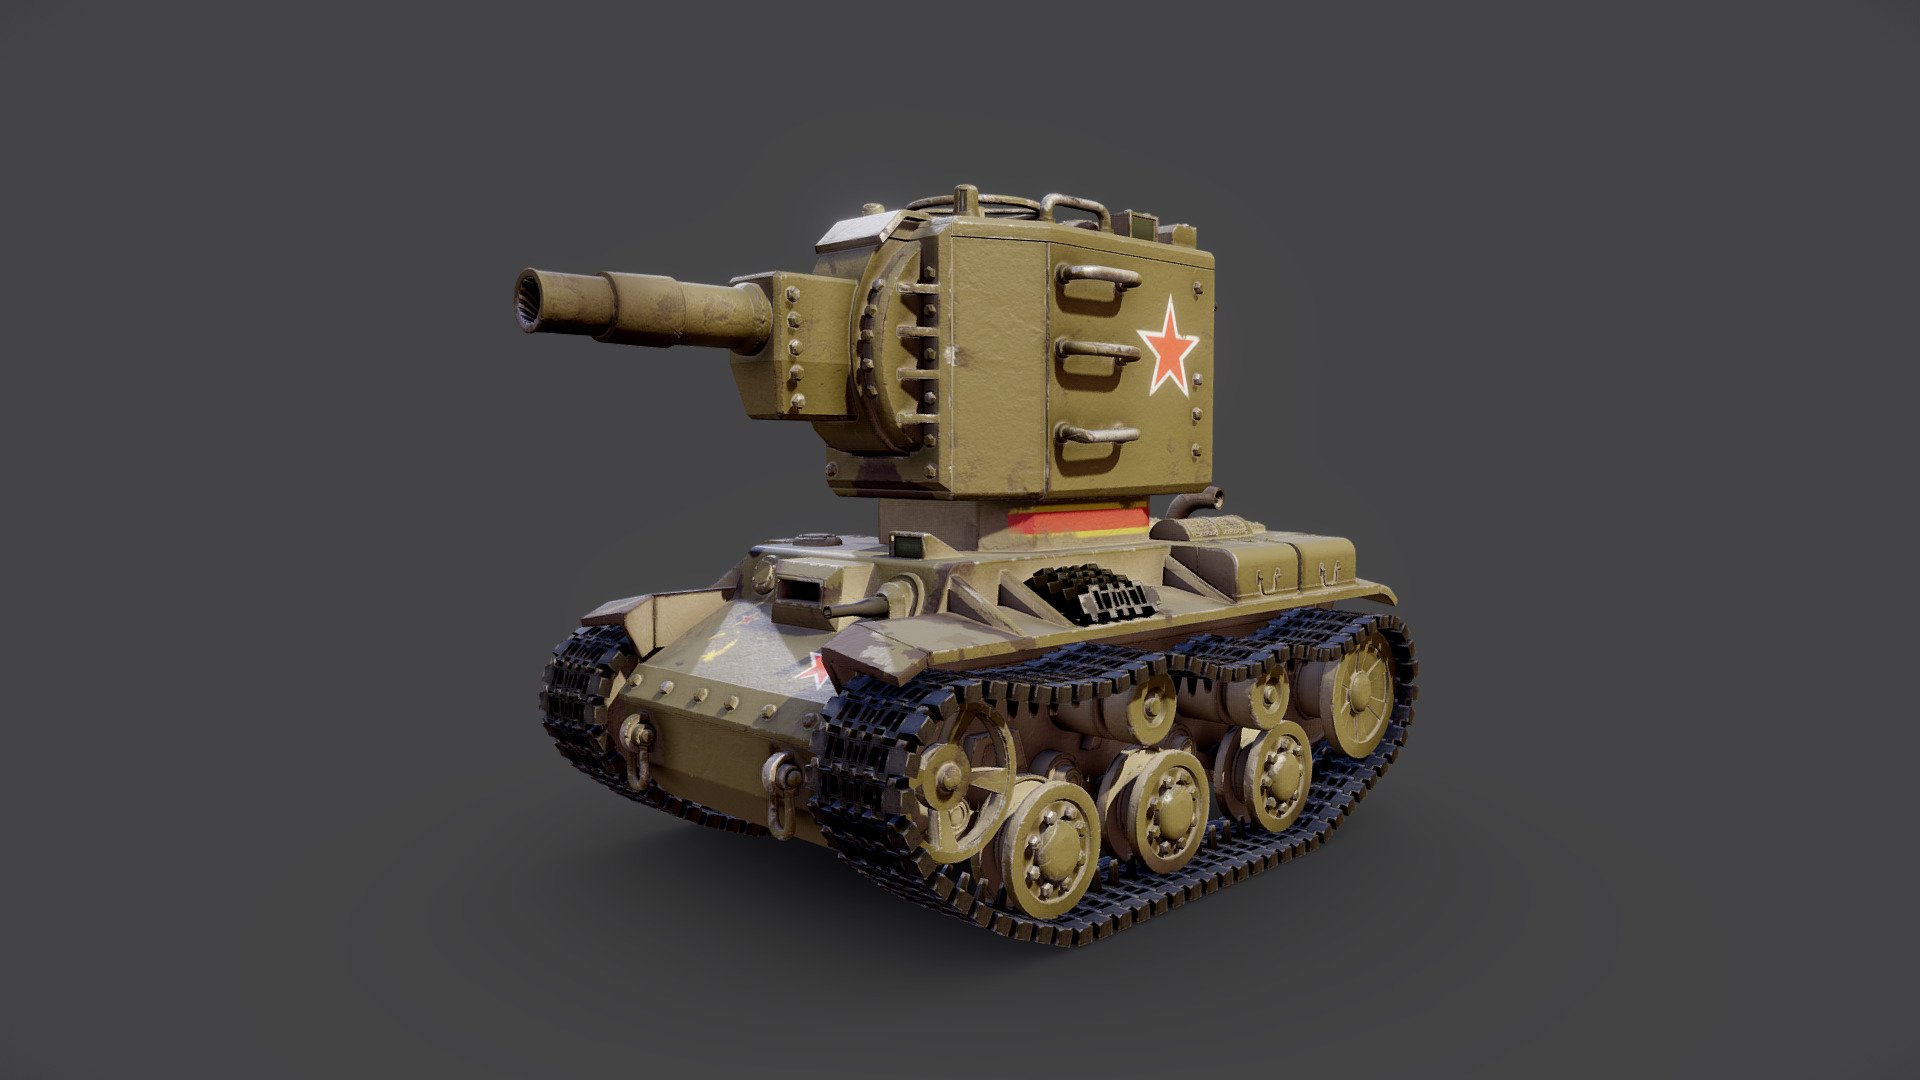 The 3D model is a toon-style representation of the real-world KV-2 tank from the USSR. It maintains the distinctive design elements of the original tank, including a large turret and a compact body. The overall style of the model emphasizes its cuteness while staying true to the KV-2's authentic appearance.

Materials




PBR metalness  (base colour, metallic, roughness, normal OpenGL, AO)

UV




Single UV Set

Mix-overlapping UV’s (Tracks are overlapping)

Textures 4096x4096

Files




Blender 3.5.1

FBX

glTF

Obj

PNG

Additional info




Not rigged

No animation

135k Poly

Unit setup - Meters

Single step chamfers with weighted normals applied

Demo scene not included https://www.youtube.com/watch?v=NjUTknRlM84

Renders here

 - KV 2 - USSR Heavy Tank - Buy Royalty Free 3D model by Warkarma 3d model